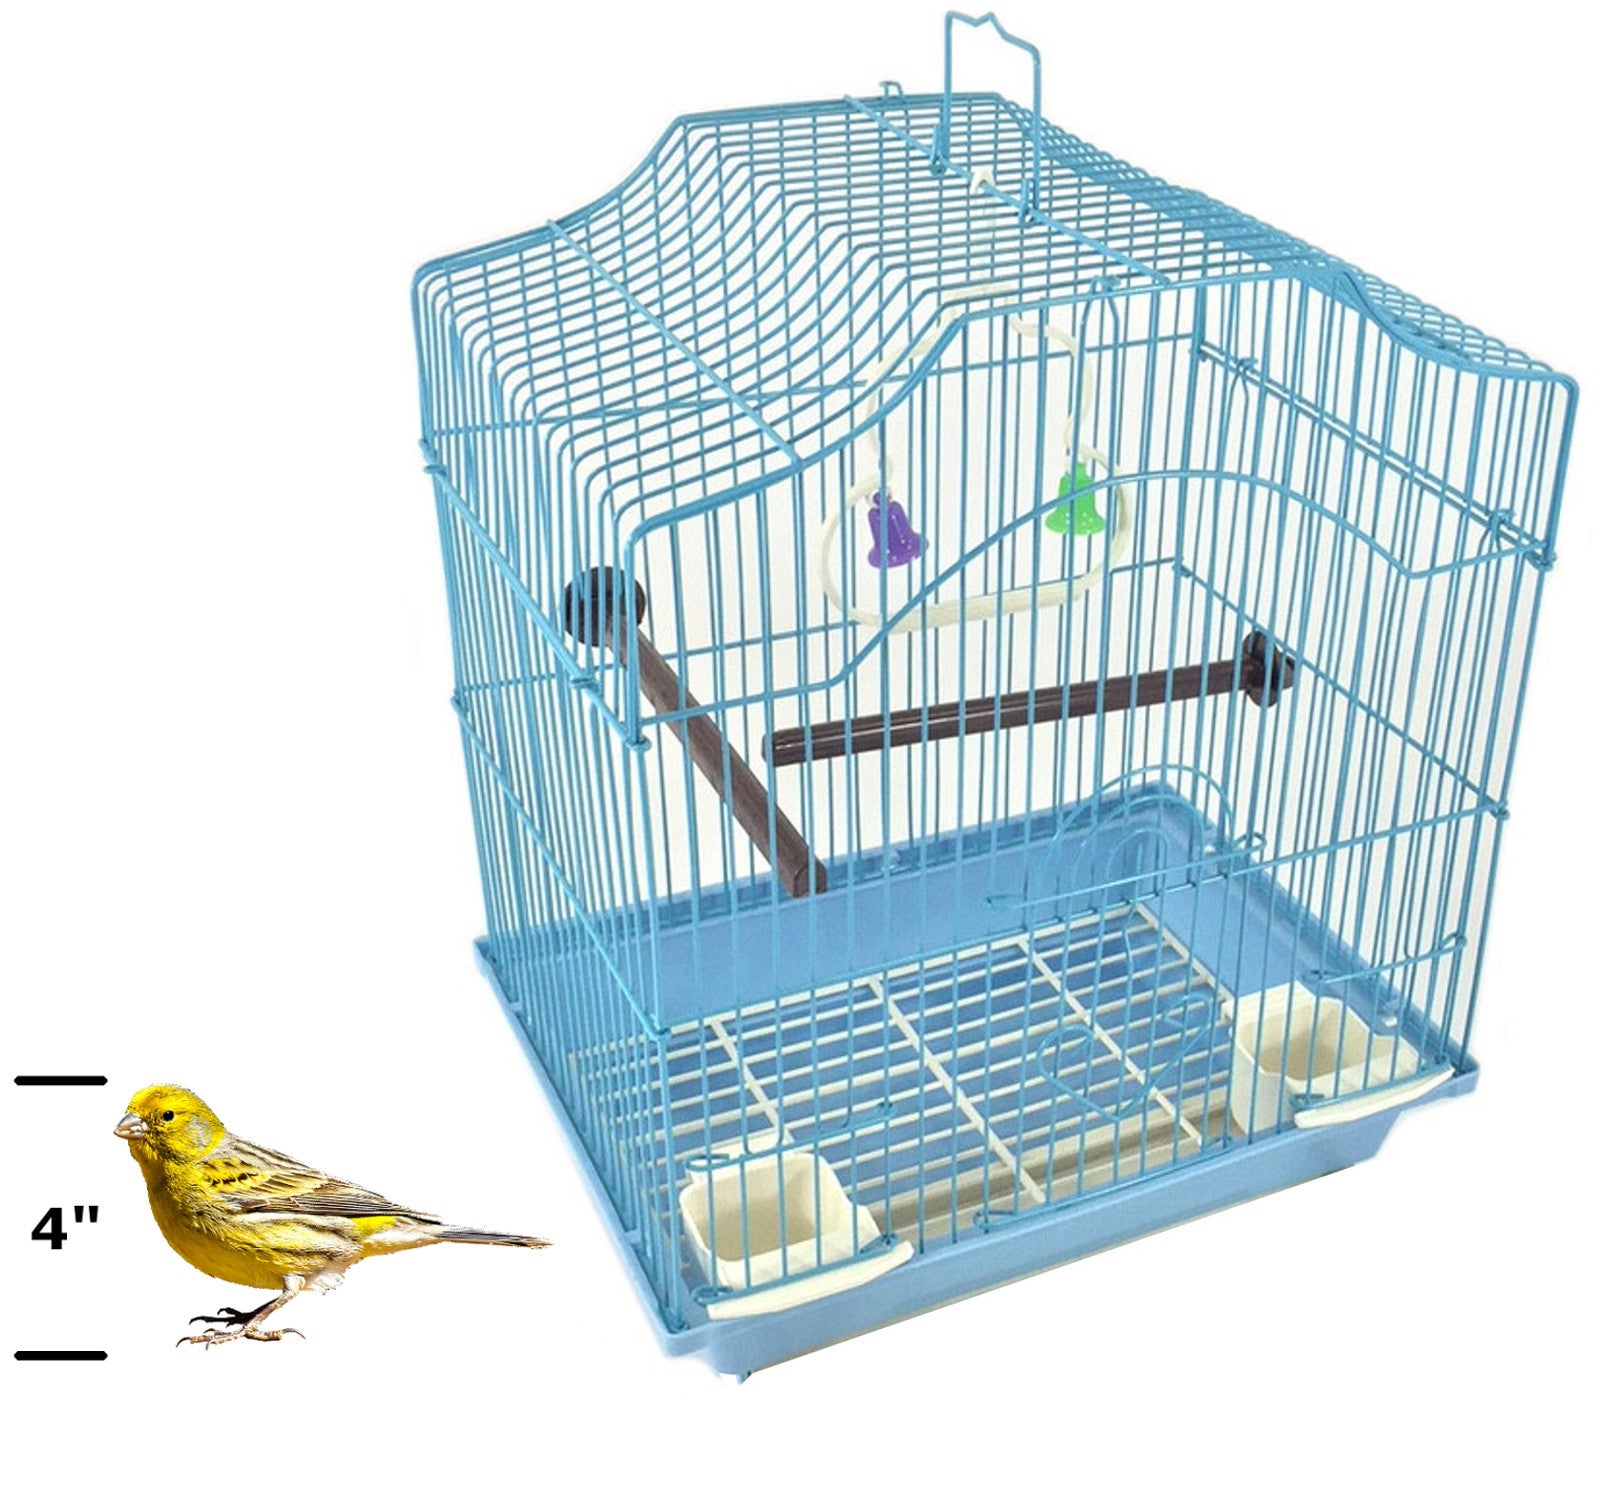  GOOBIX Square Bird Cage with Feeder Plastic Hanging Bird House  Carrier with Hook for Small Birds Parakeets Finches Cockatiels : Pet  Supplies